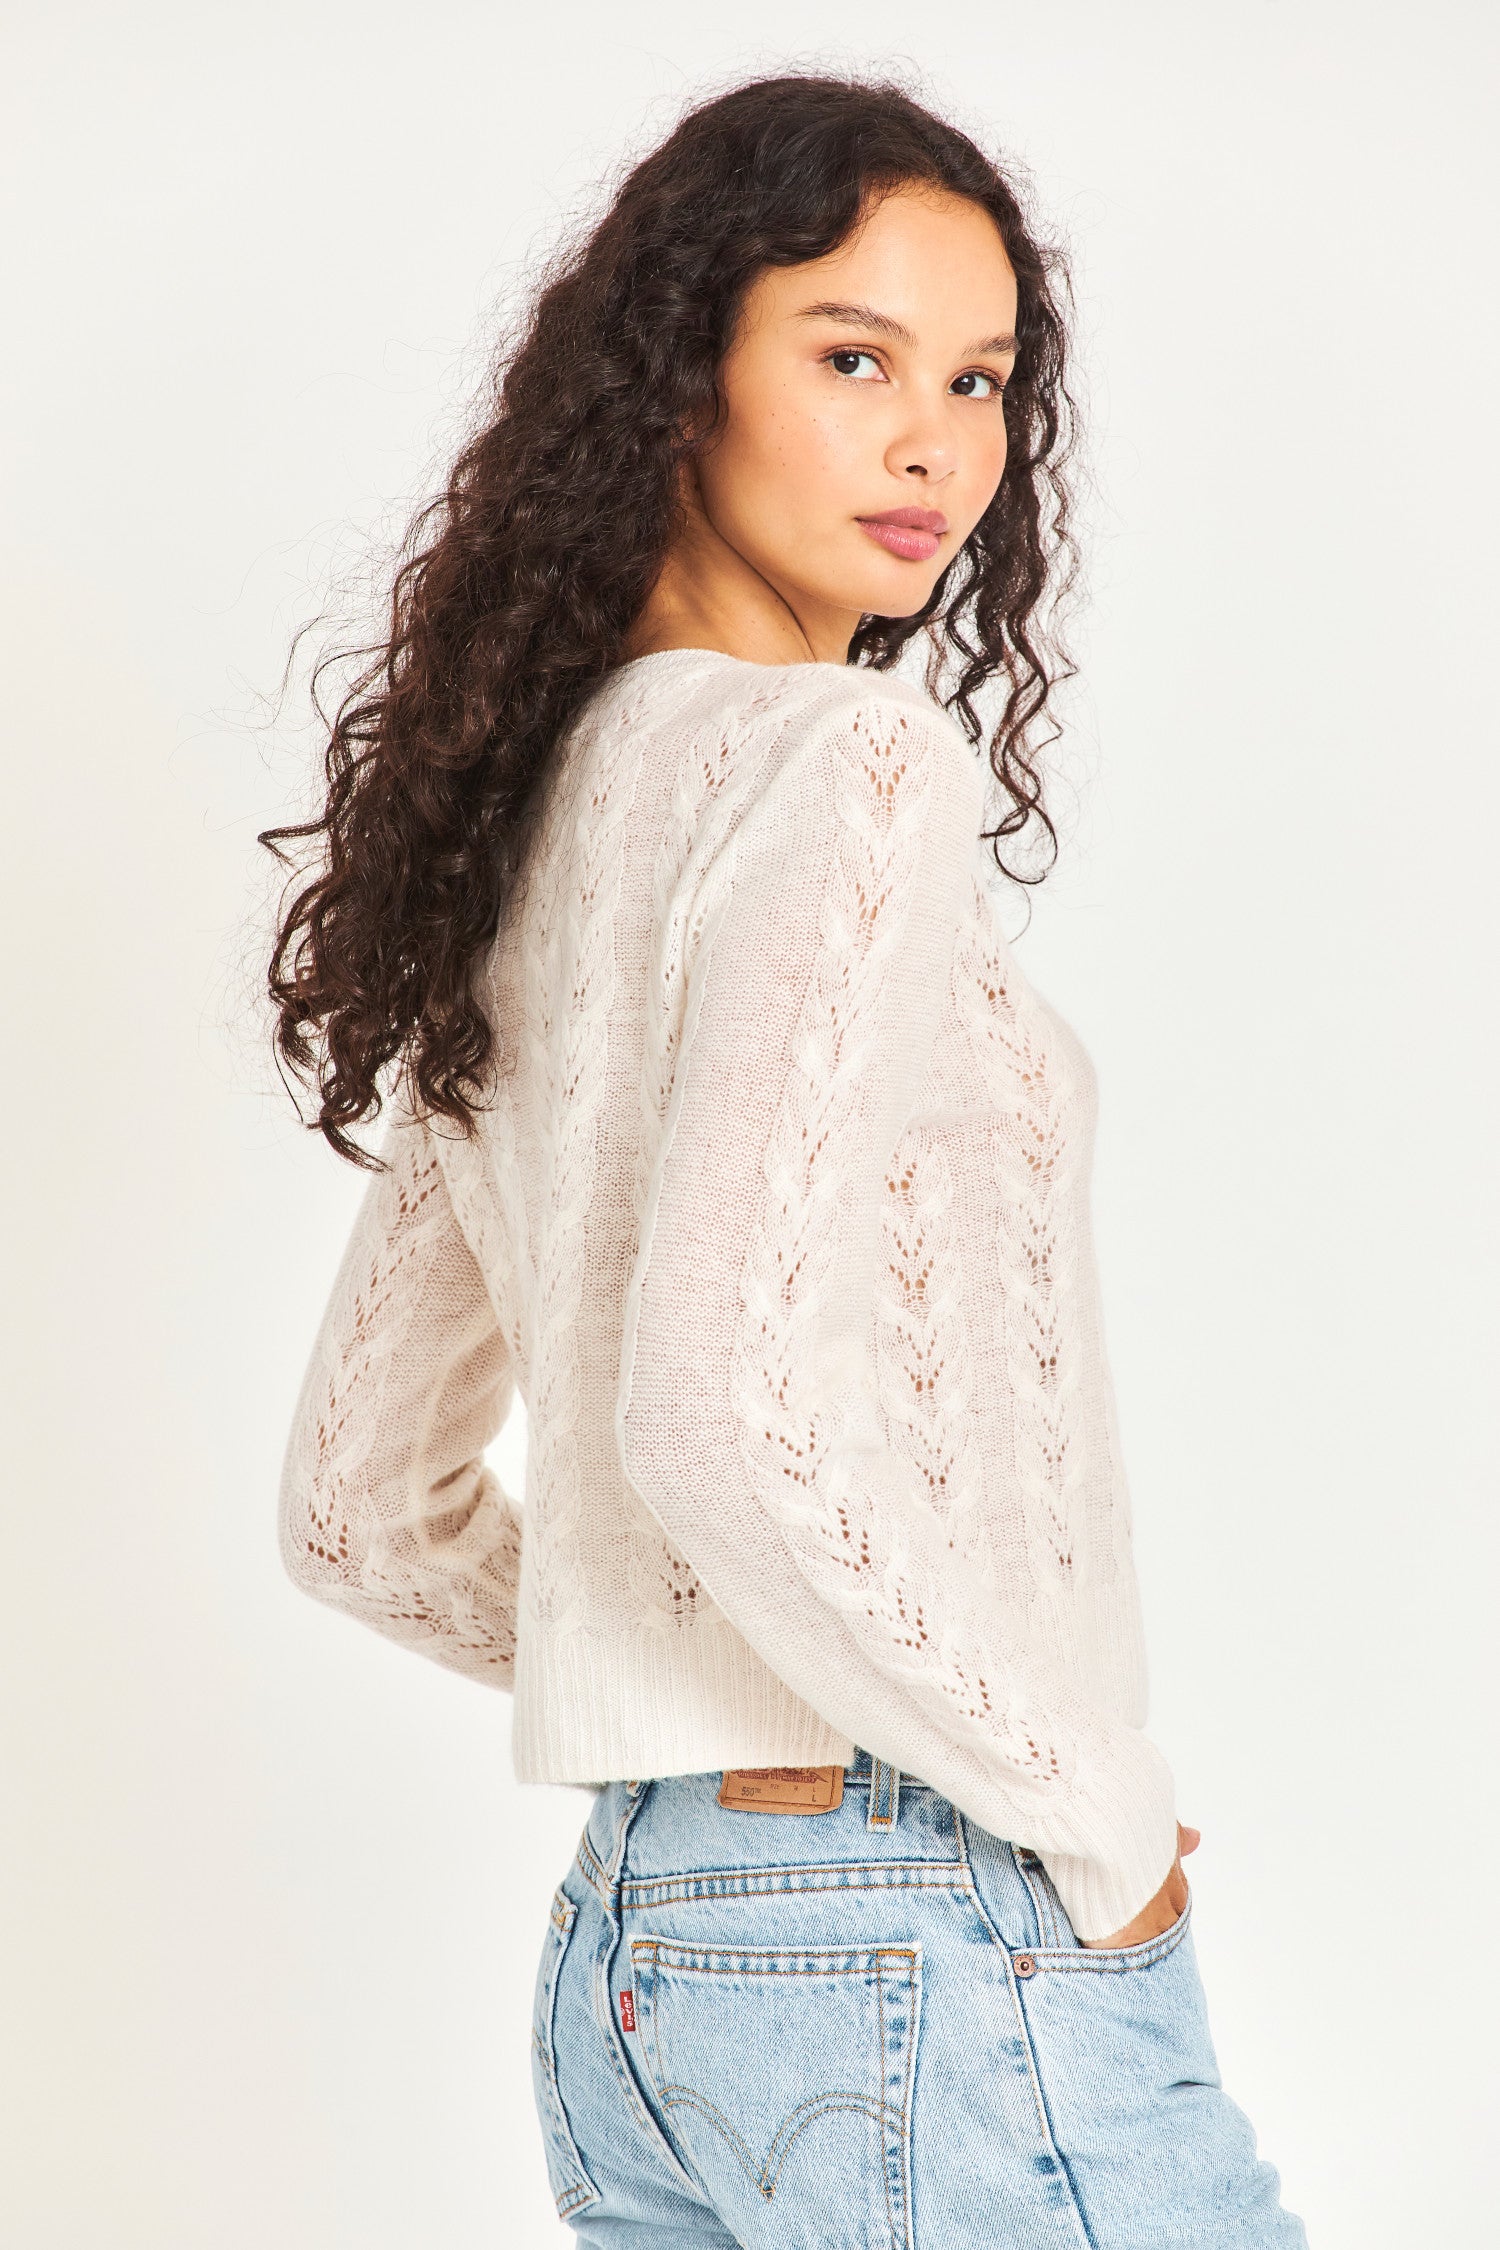  The lightweight white cable knit sweater is a cashmere wool blended sheer fabric with pointelle detailing and a hand embellished neckline with crystals and clusters of iridescent pearls. 